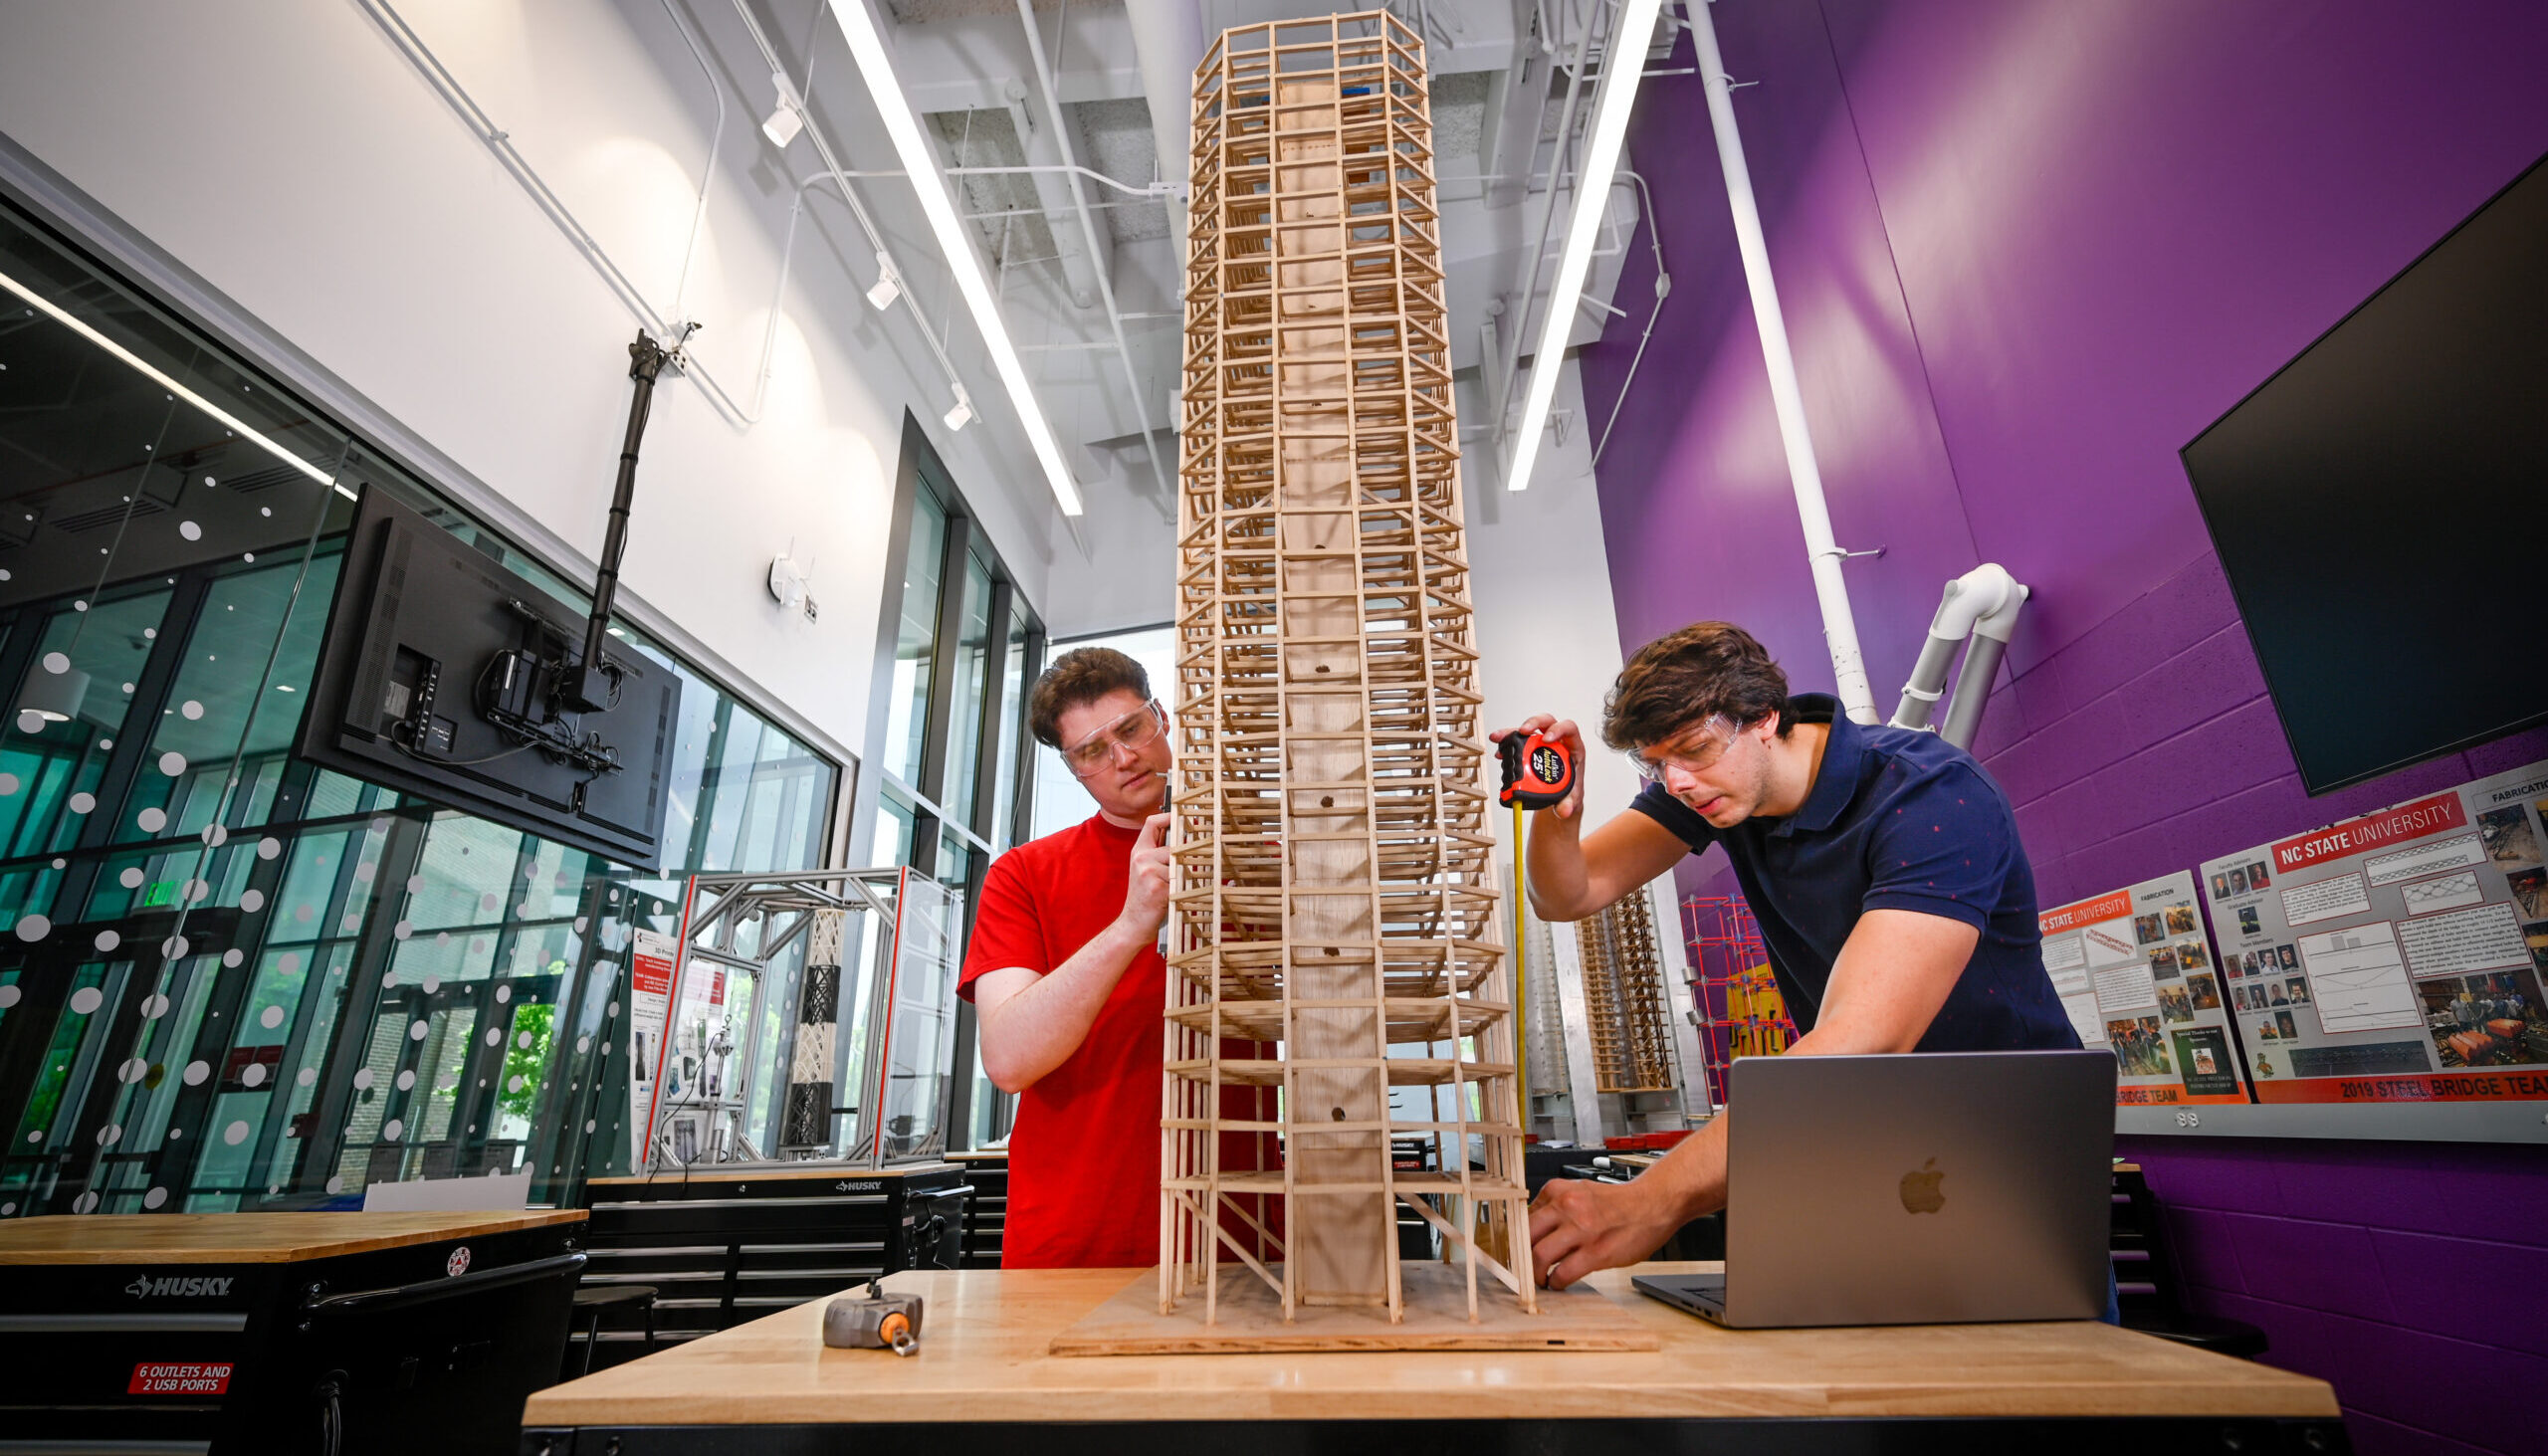 Students work in the Fincher Lab in Fitts-Woolard Hall. NC State University's Department of Civil, Construction, and Environmental Engineering offers undergraduate degrees in civil engineering, construction engineering, and environmental engineering.